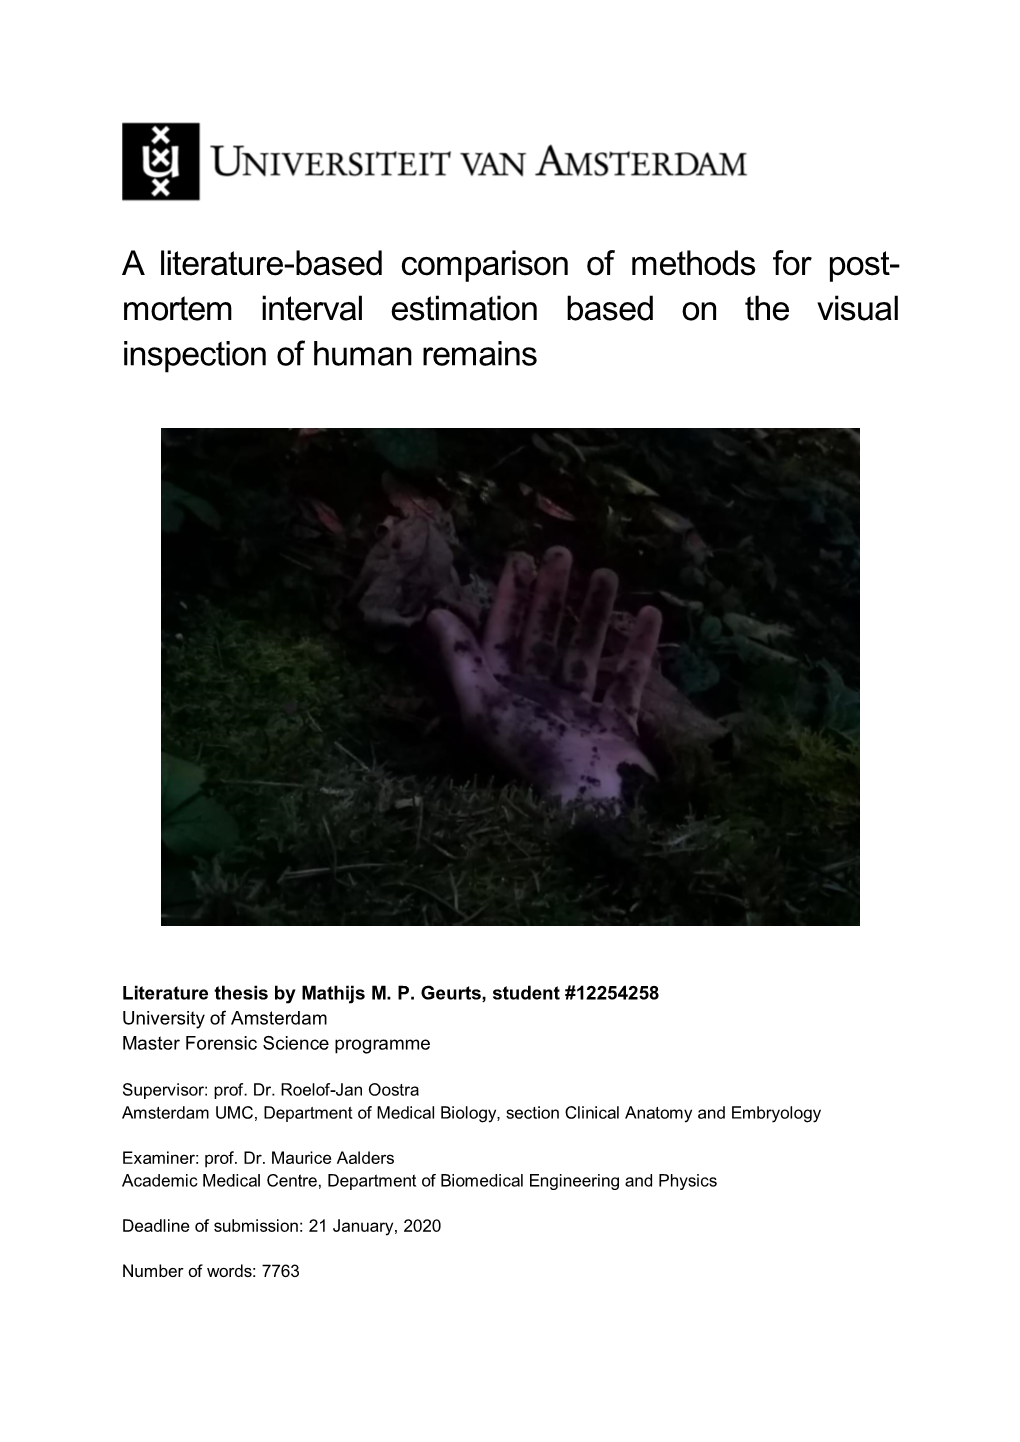 Mortem Interval Estimation Based on the Visual Inspection of Human Remains